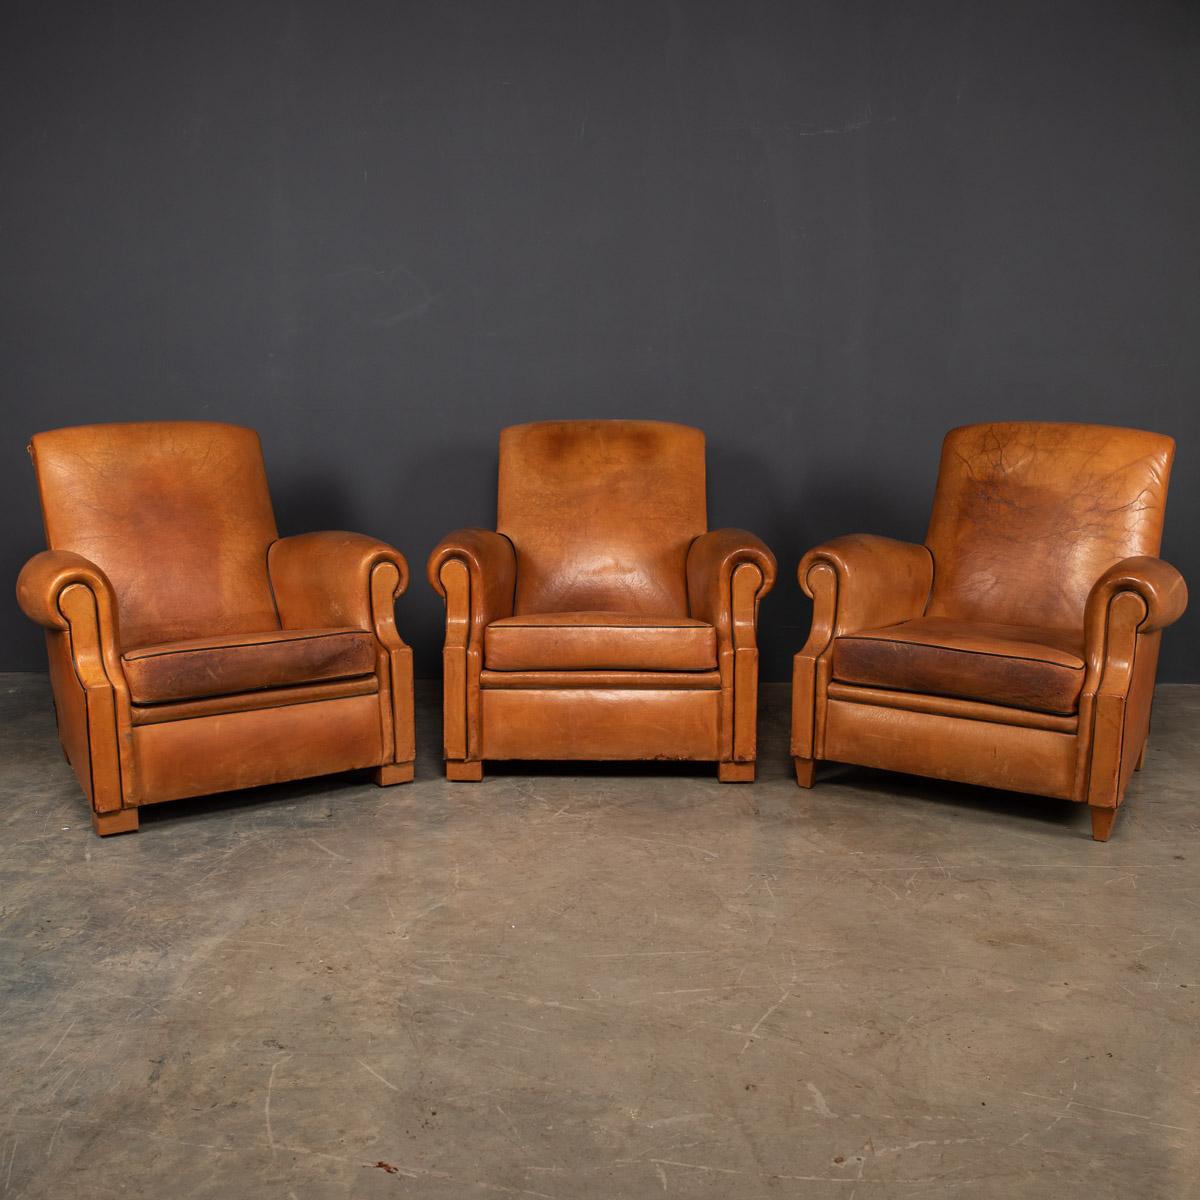 Superb 20th century French set of three club chairs, showing superb patina and colour, this wonderful set of club chairs were hand upholstered tan sheepskin leather and with original black piping to the front. Made in France by the finest craftsmen.